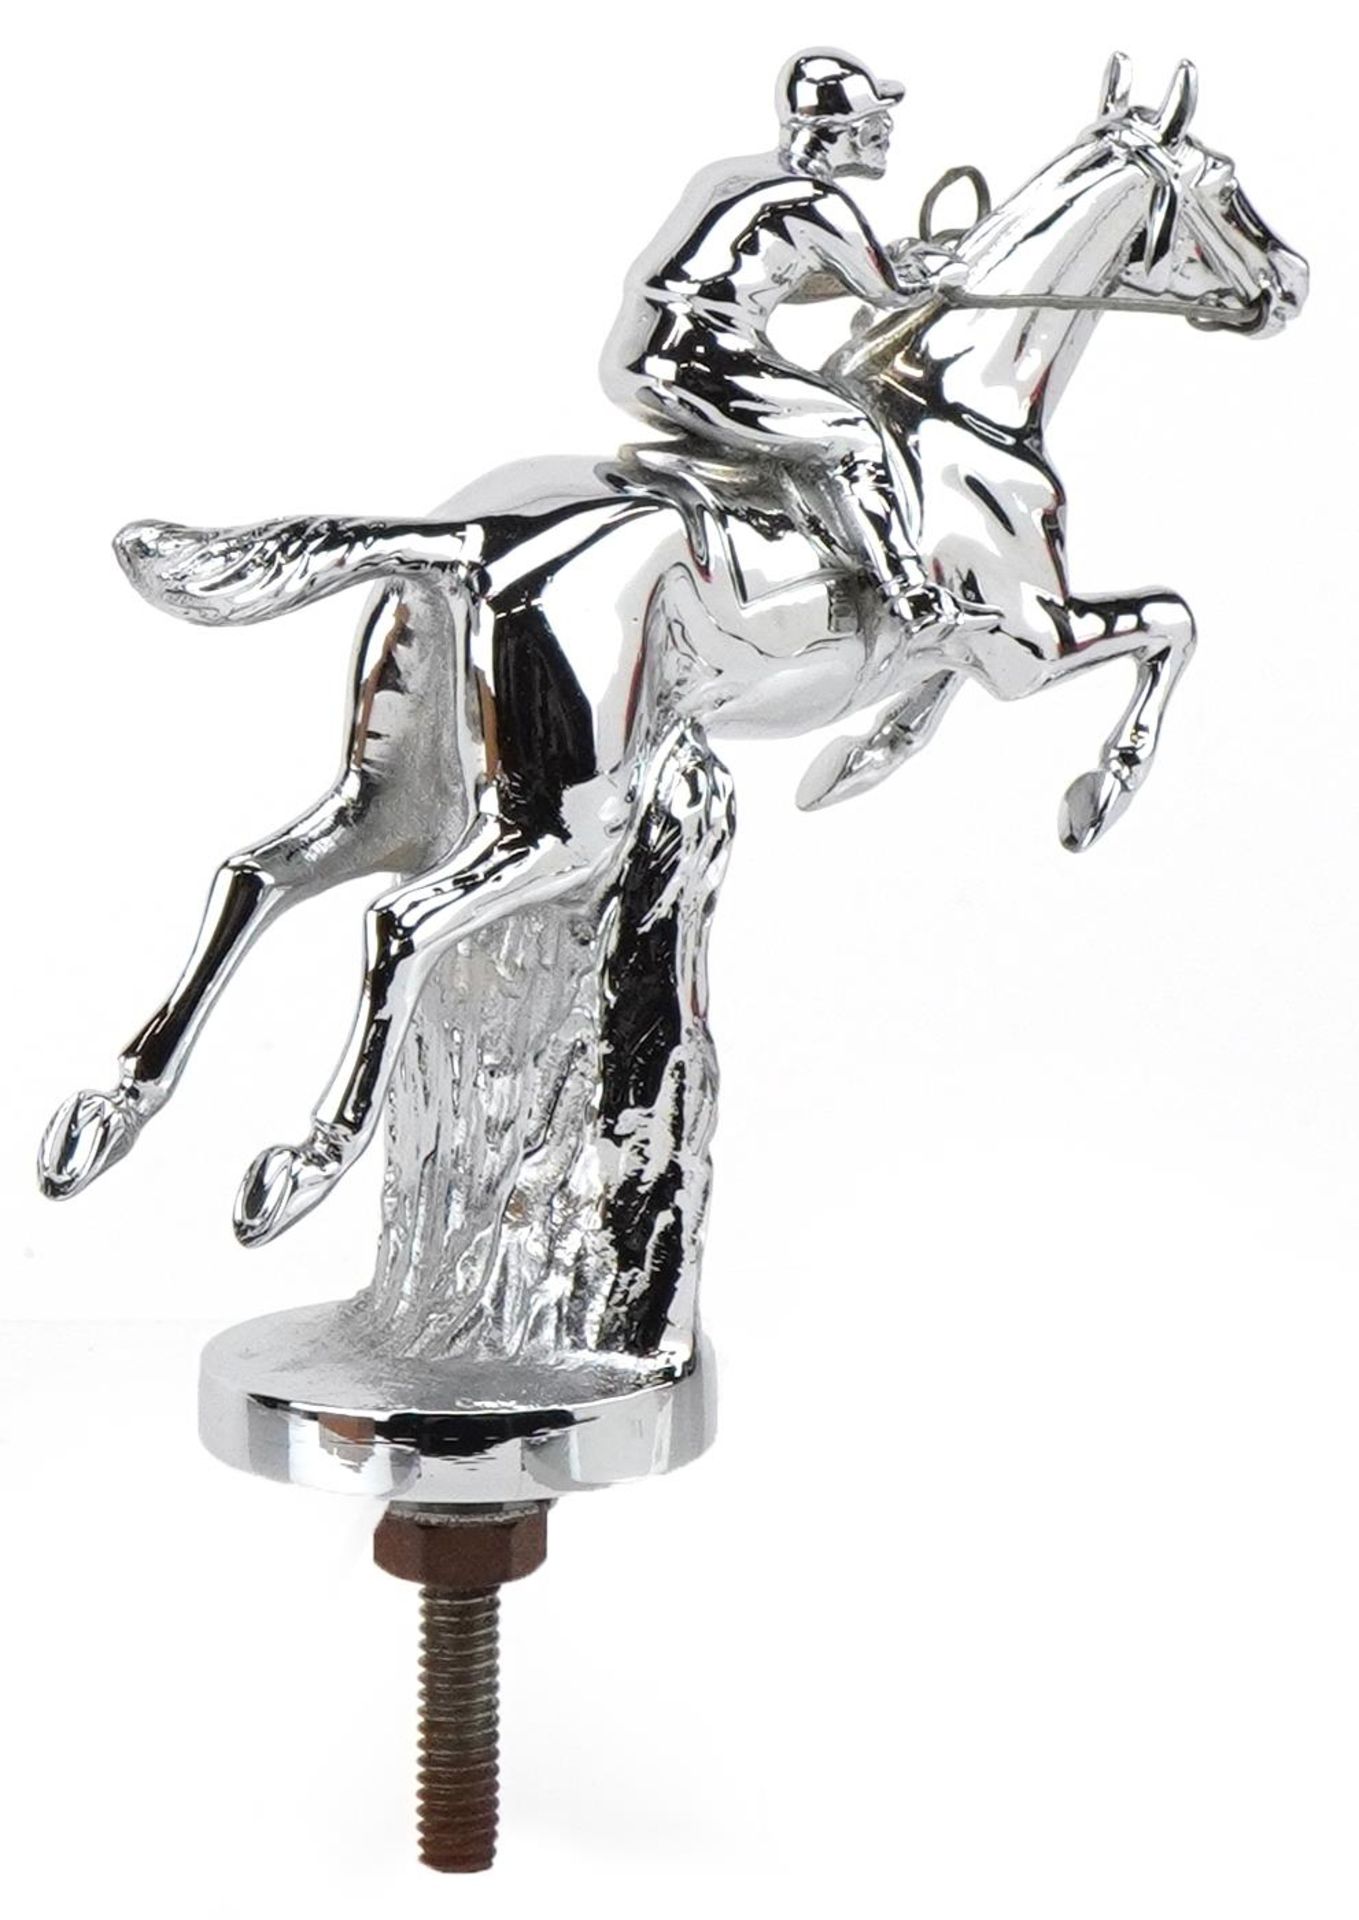 Early 20th century automobilia interest chrome plated car mascot in the form of a jockey on - Image 2 of 4